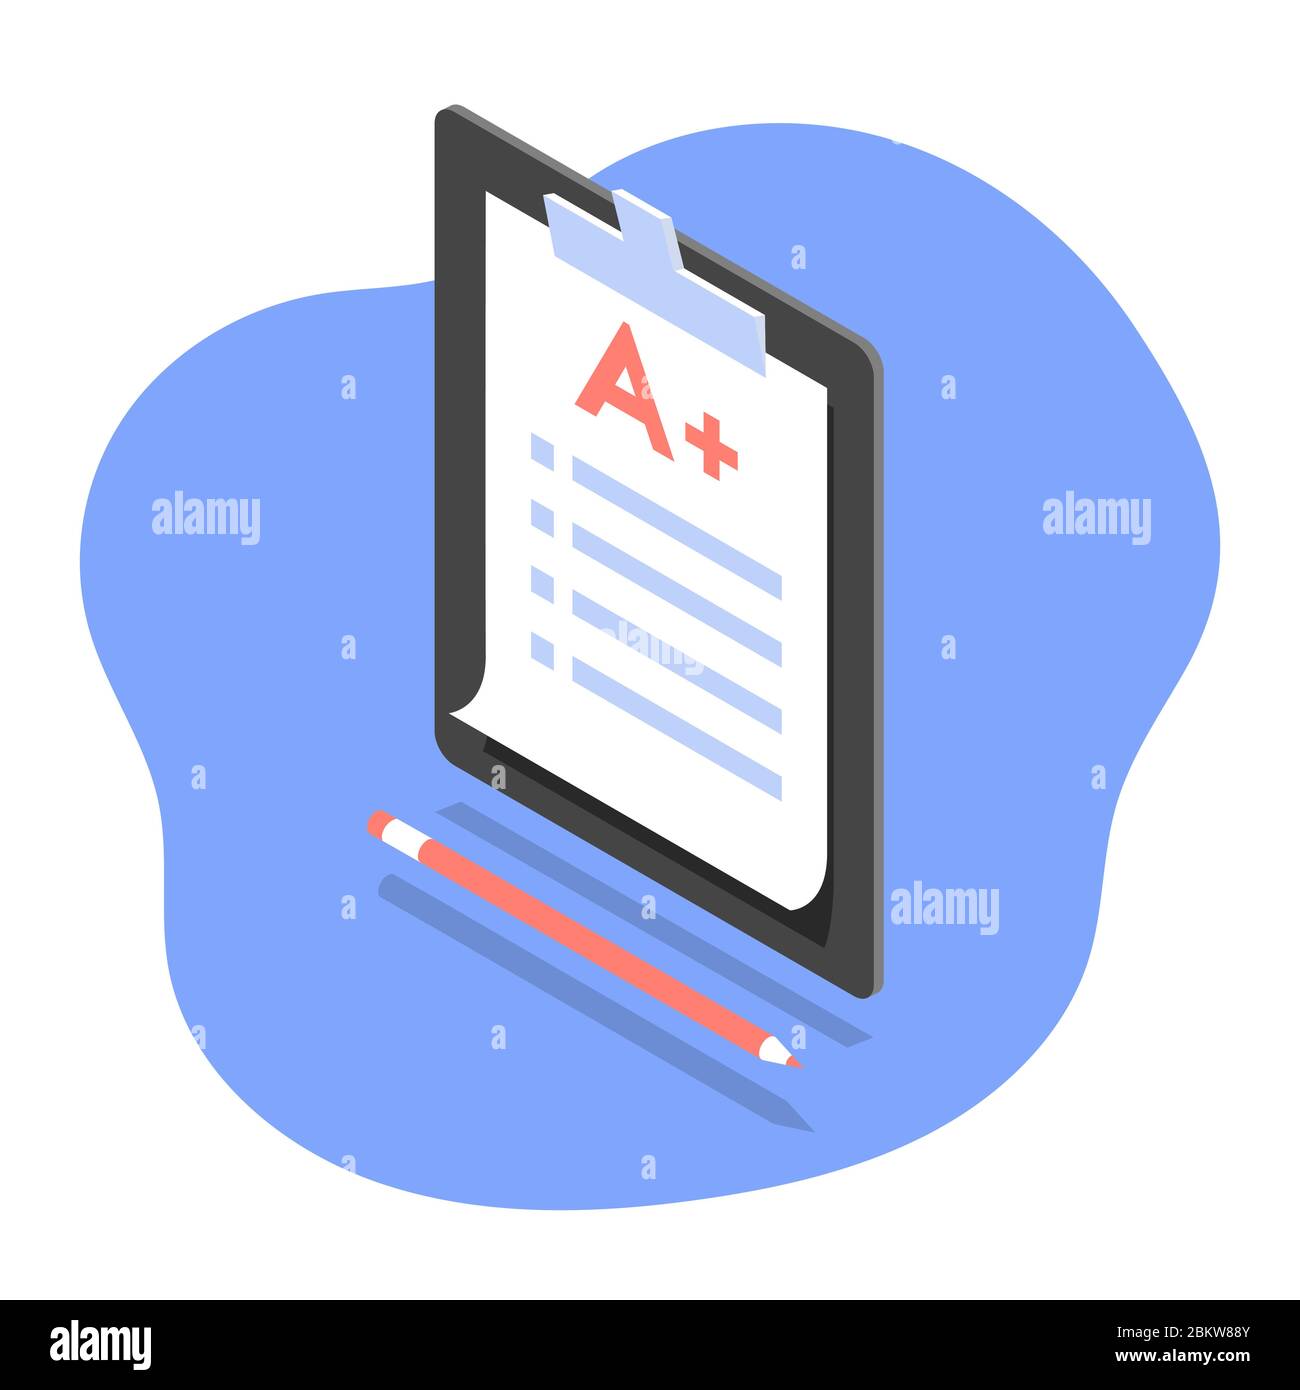 Exam and tests isometric illustration Stock Vector